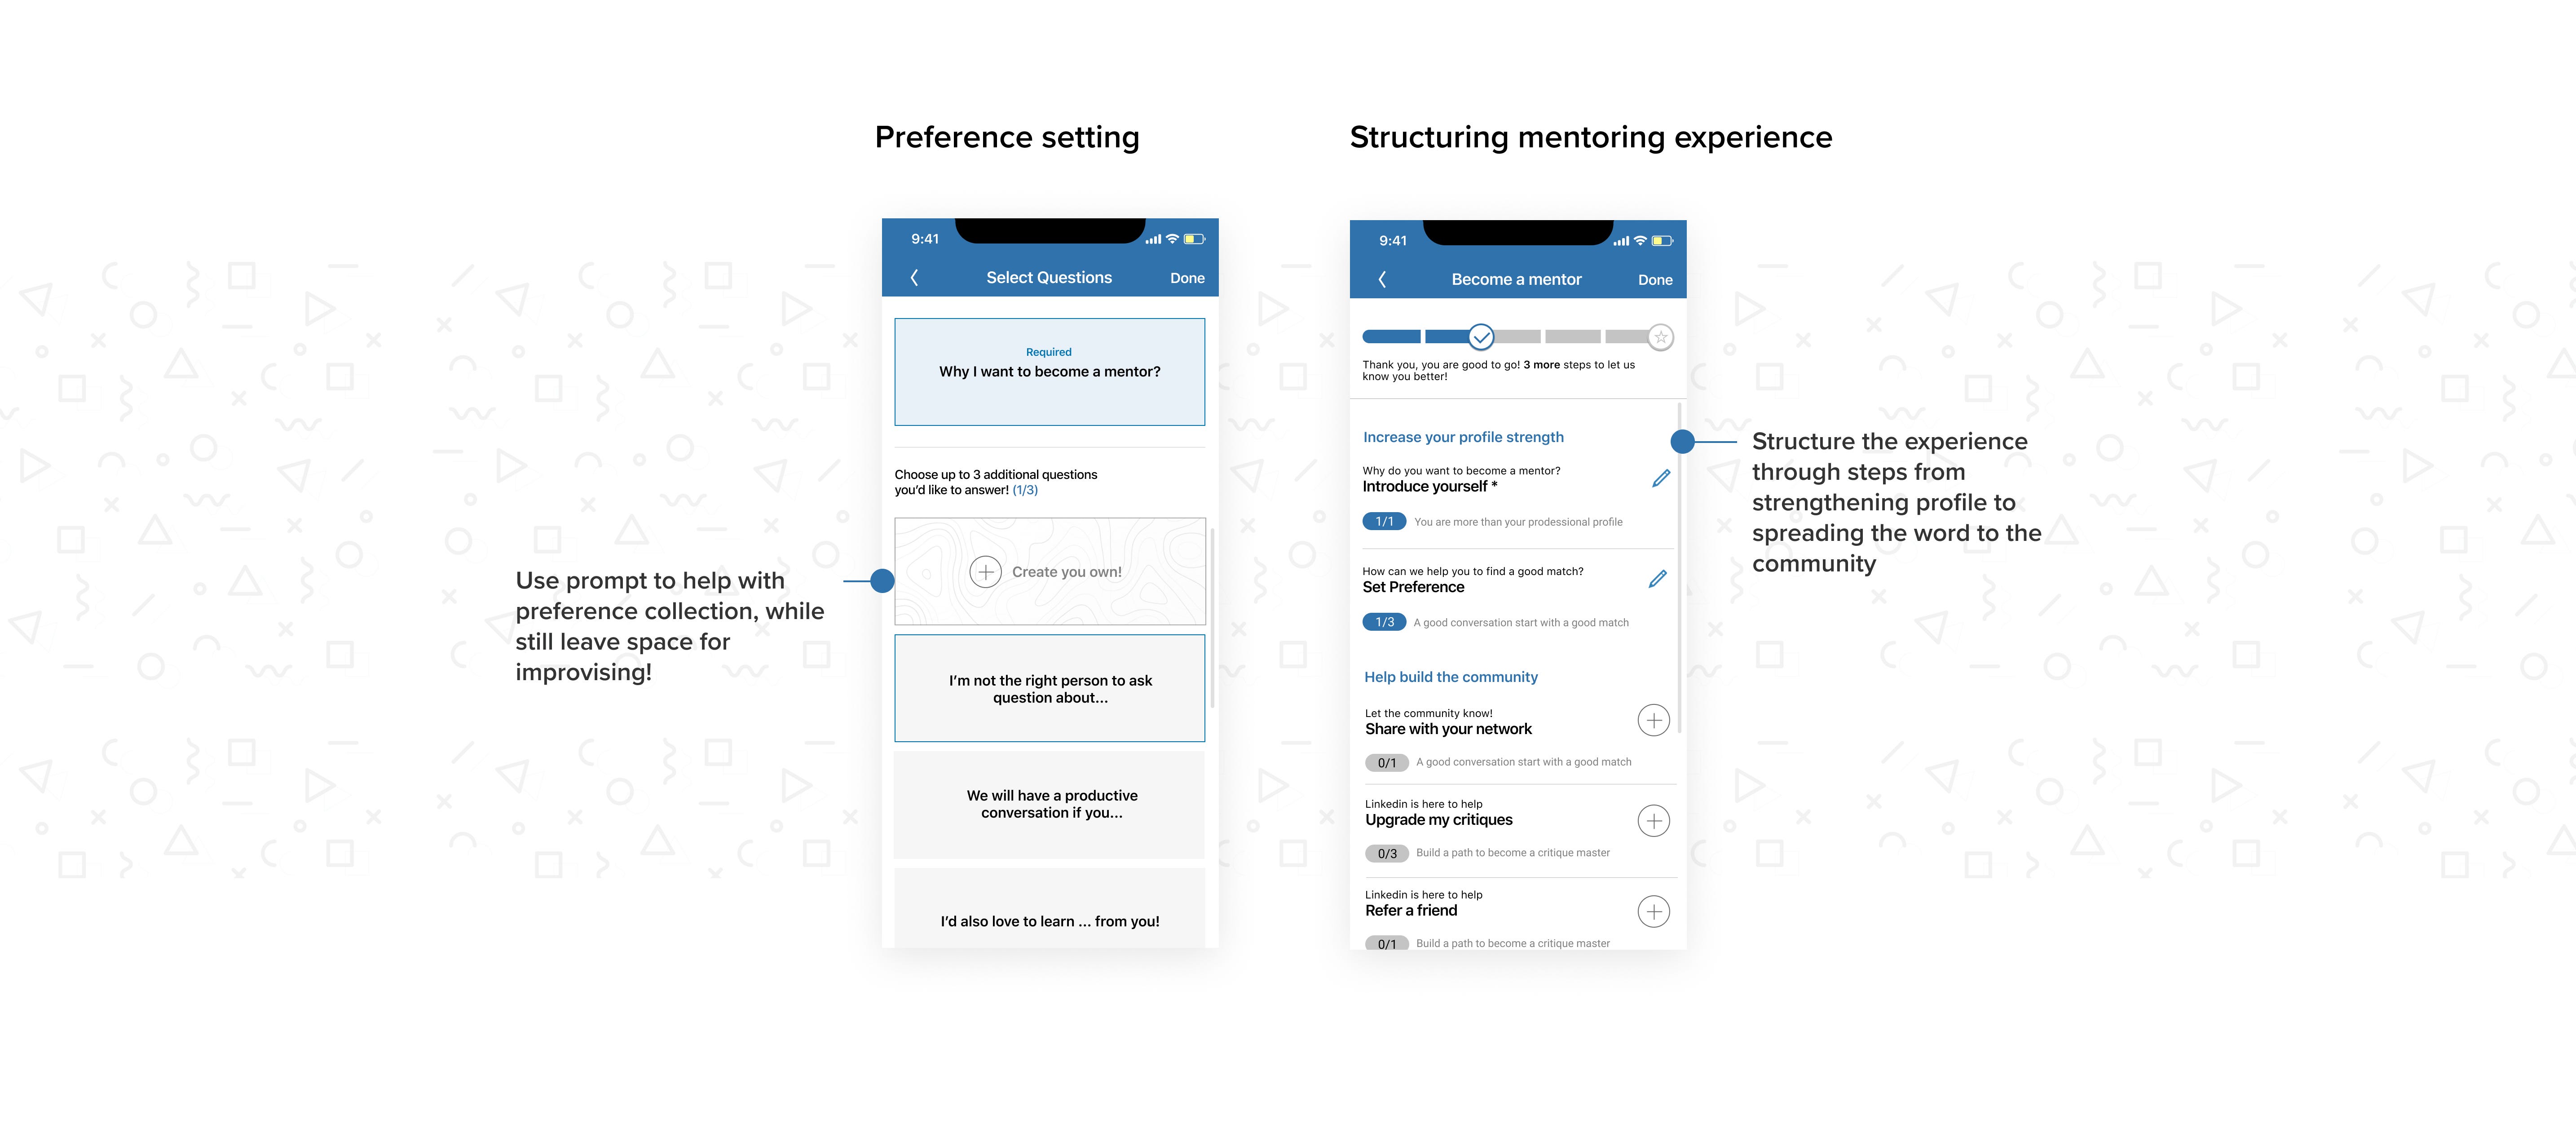 Redesigning Linkedin's mentorship feature — UX case study by Yun Yang | UX Collective